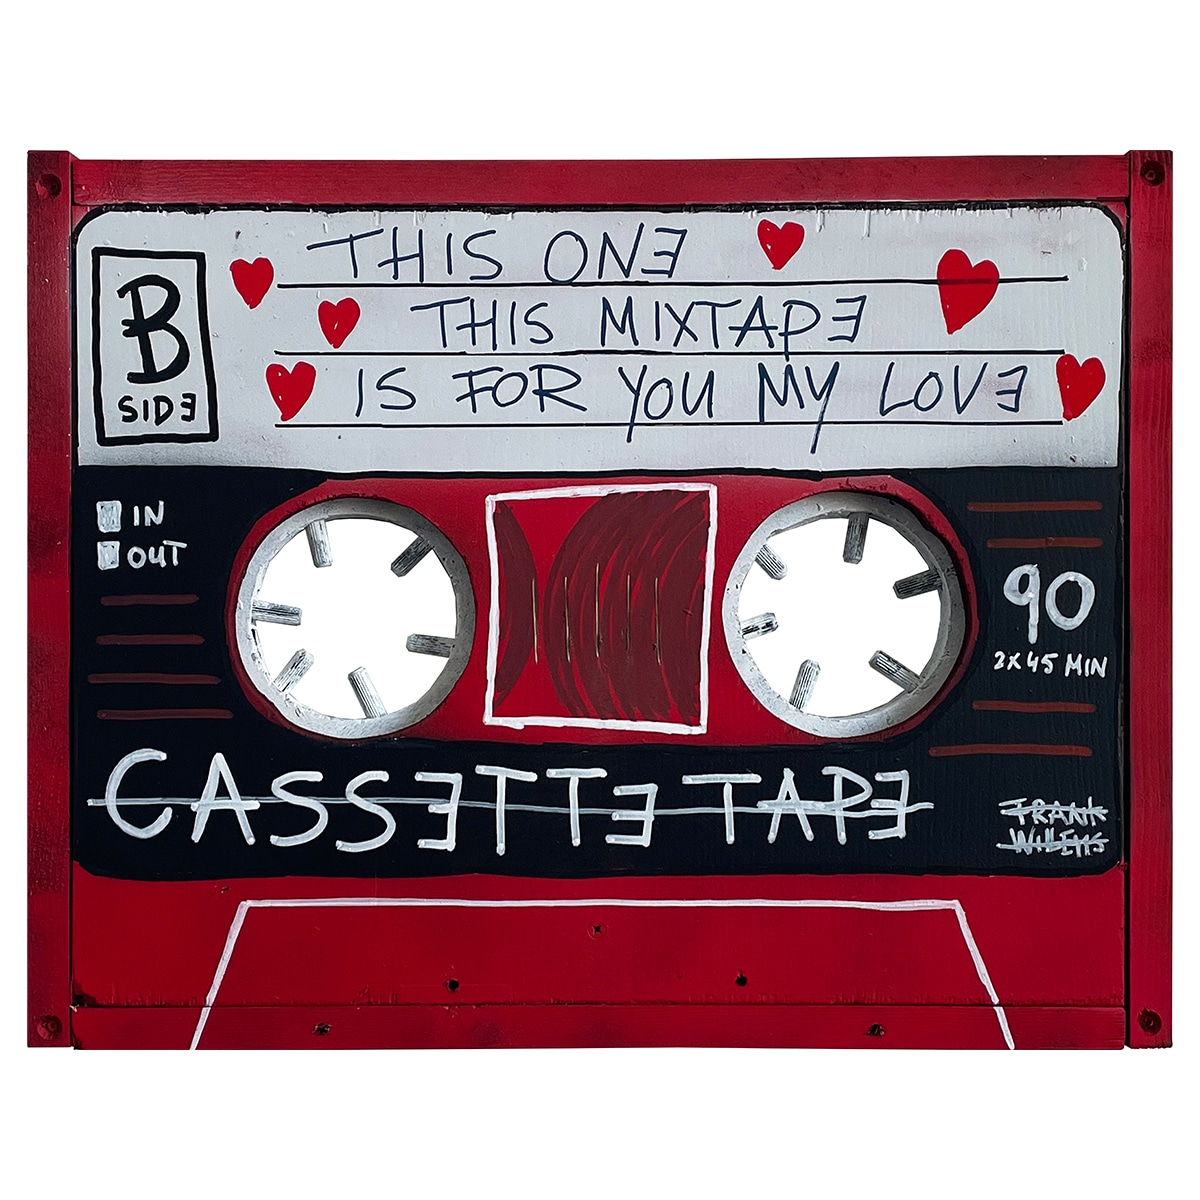 Artwork -_0000_MIXTAPE - THIS ONE, THIS MIXTAPE, IS FOR YOU MY LOVE - Frank Willems